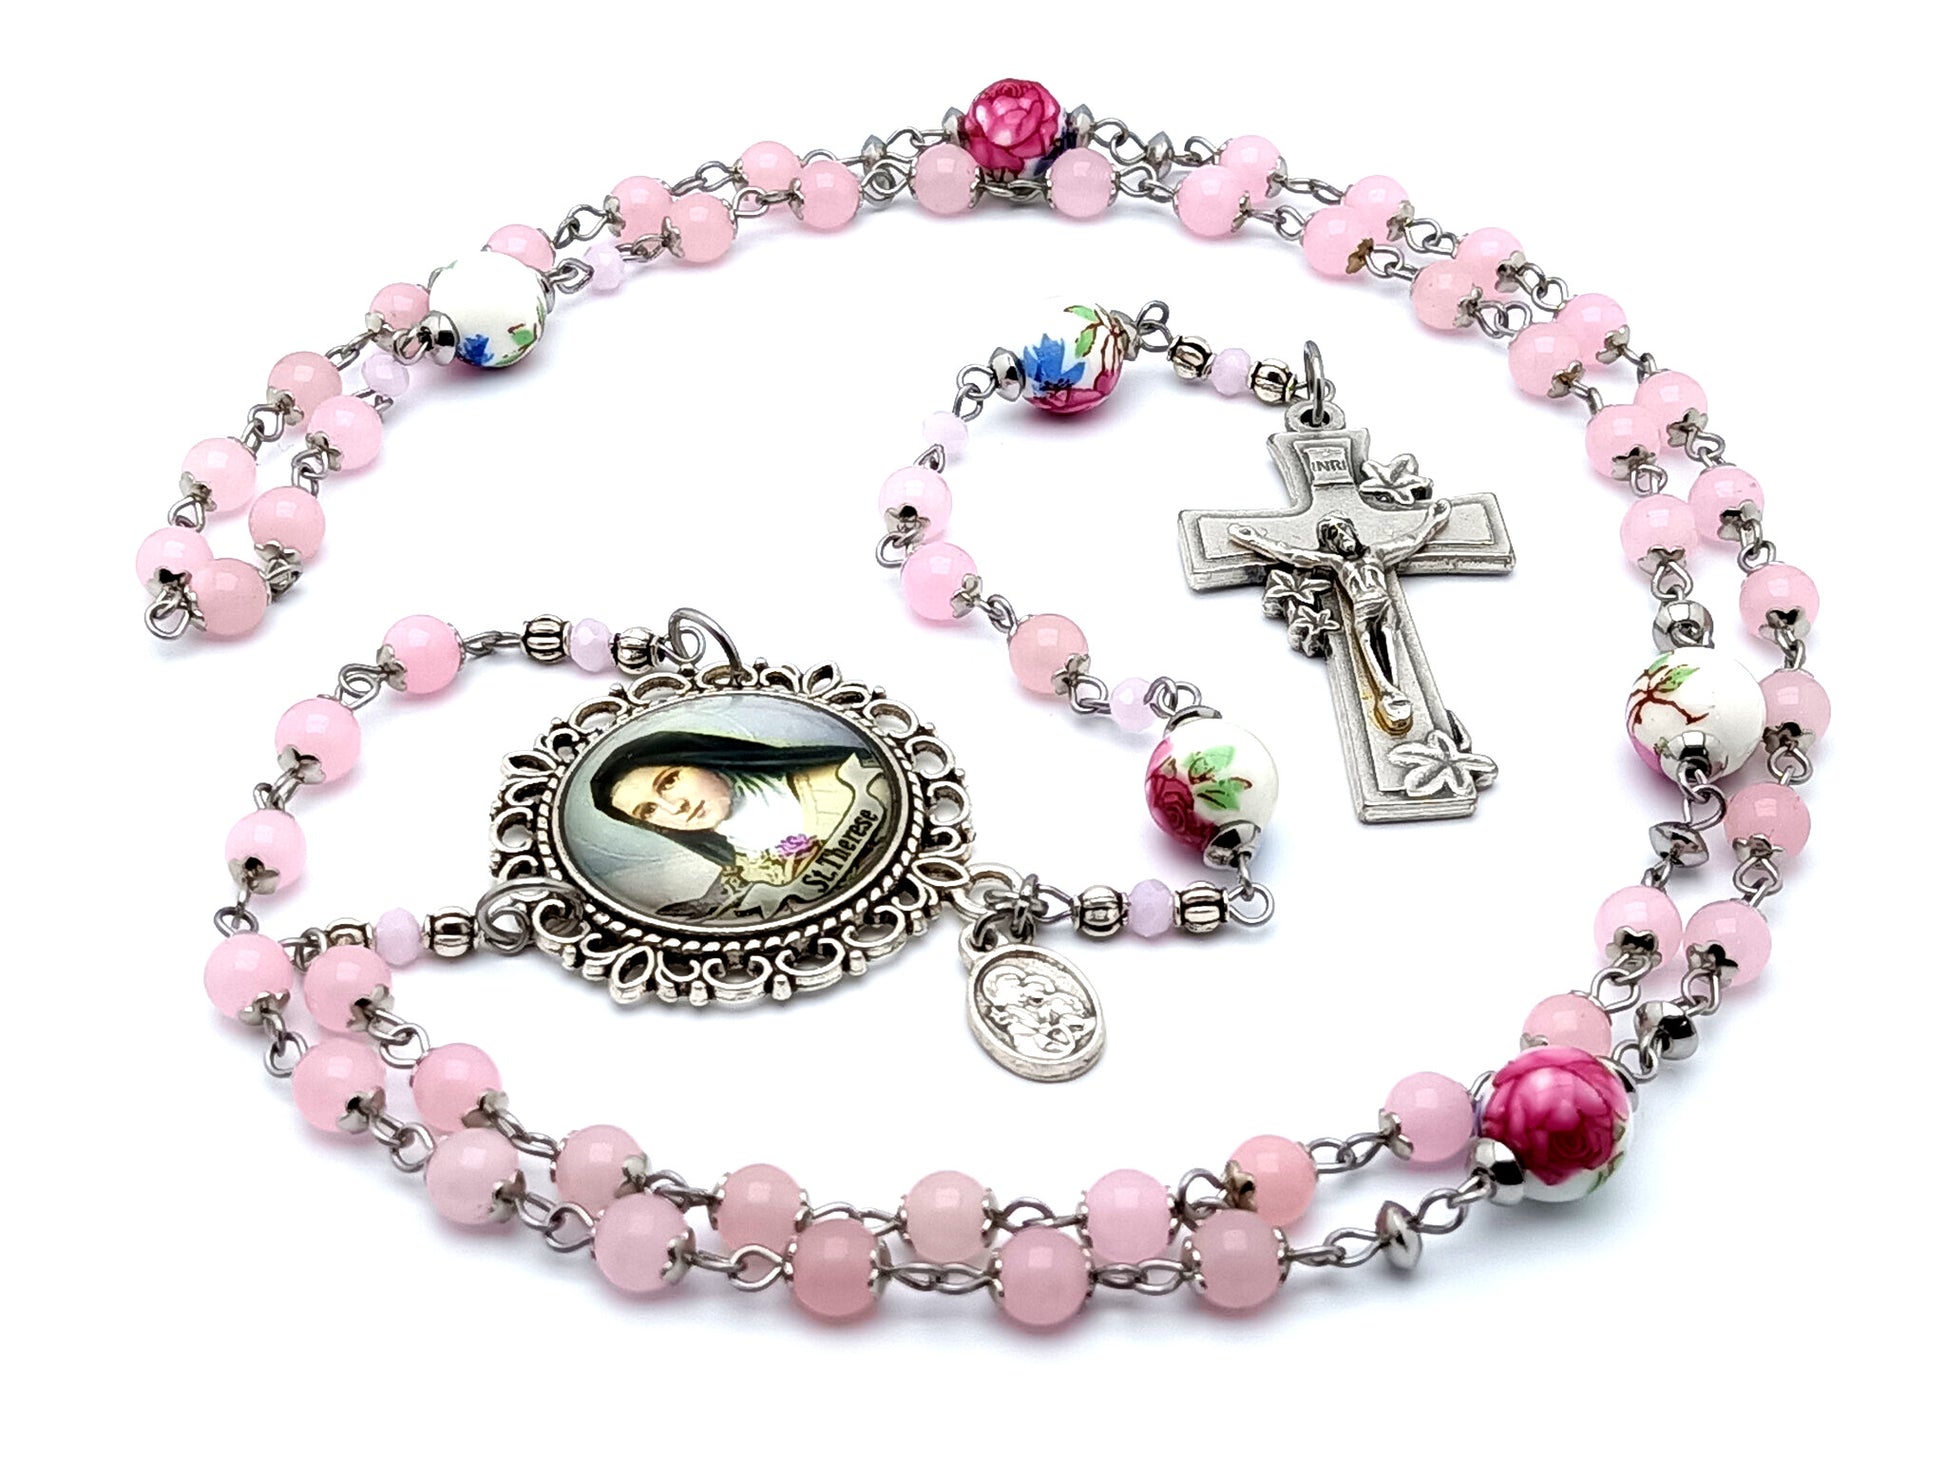 Saint Therese of Lisieux unique rosary beads with rose quartz gemstone and porcelain beads and silver lily crucifix.